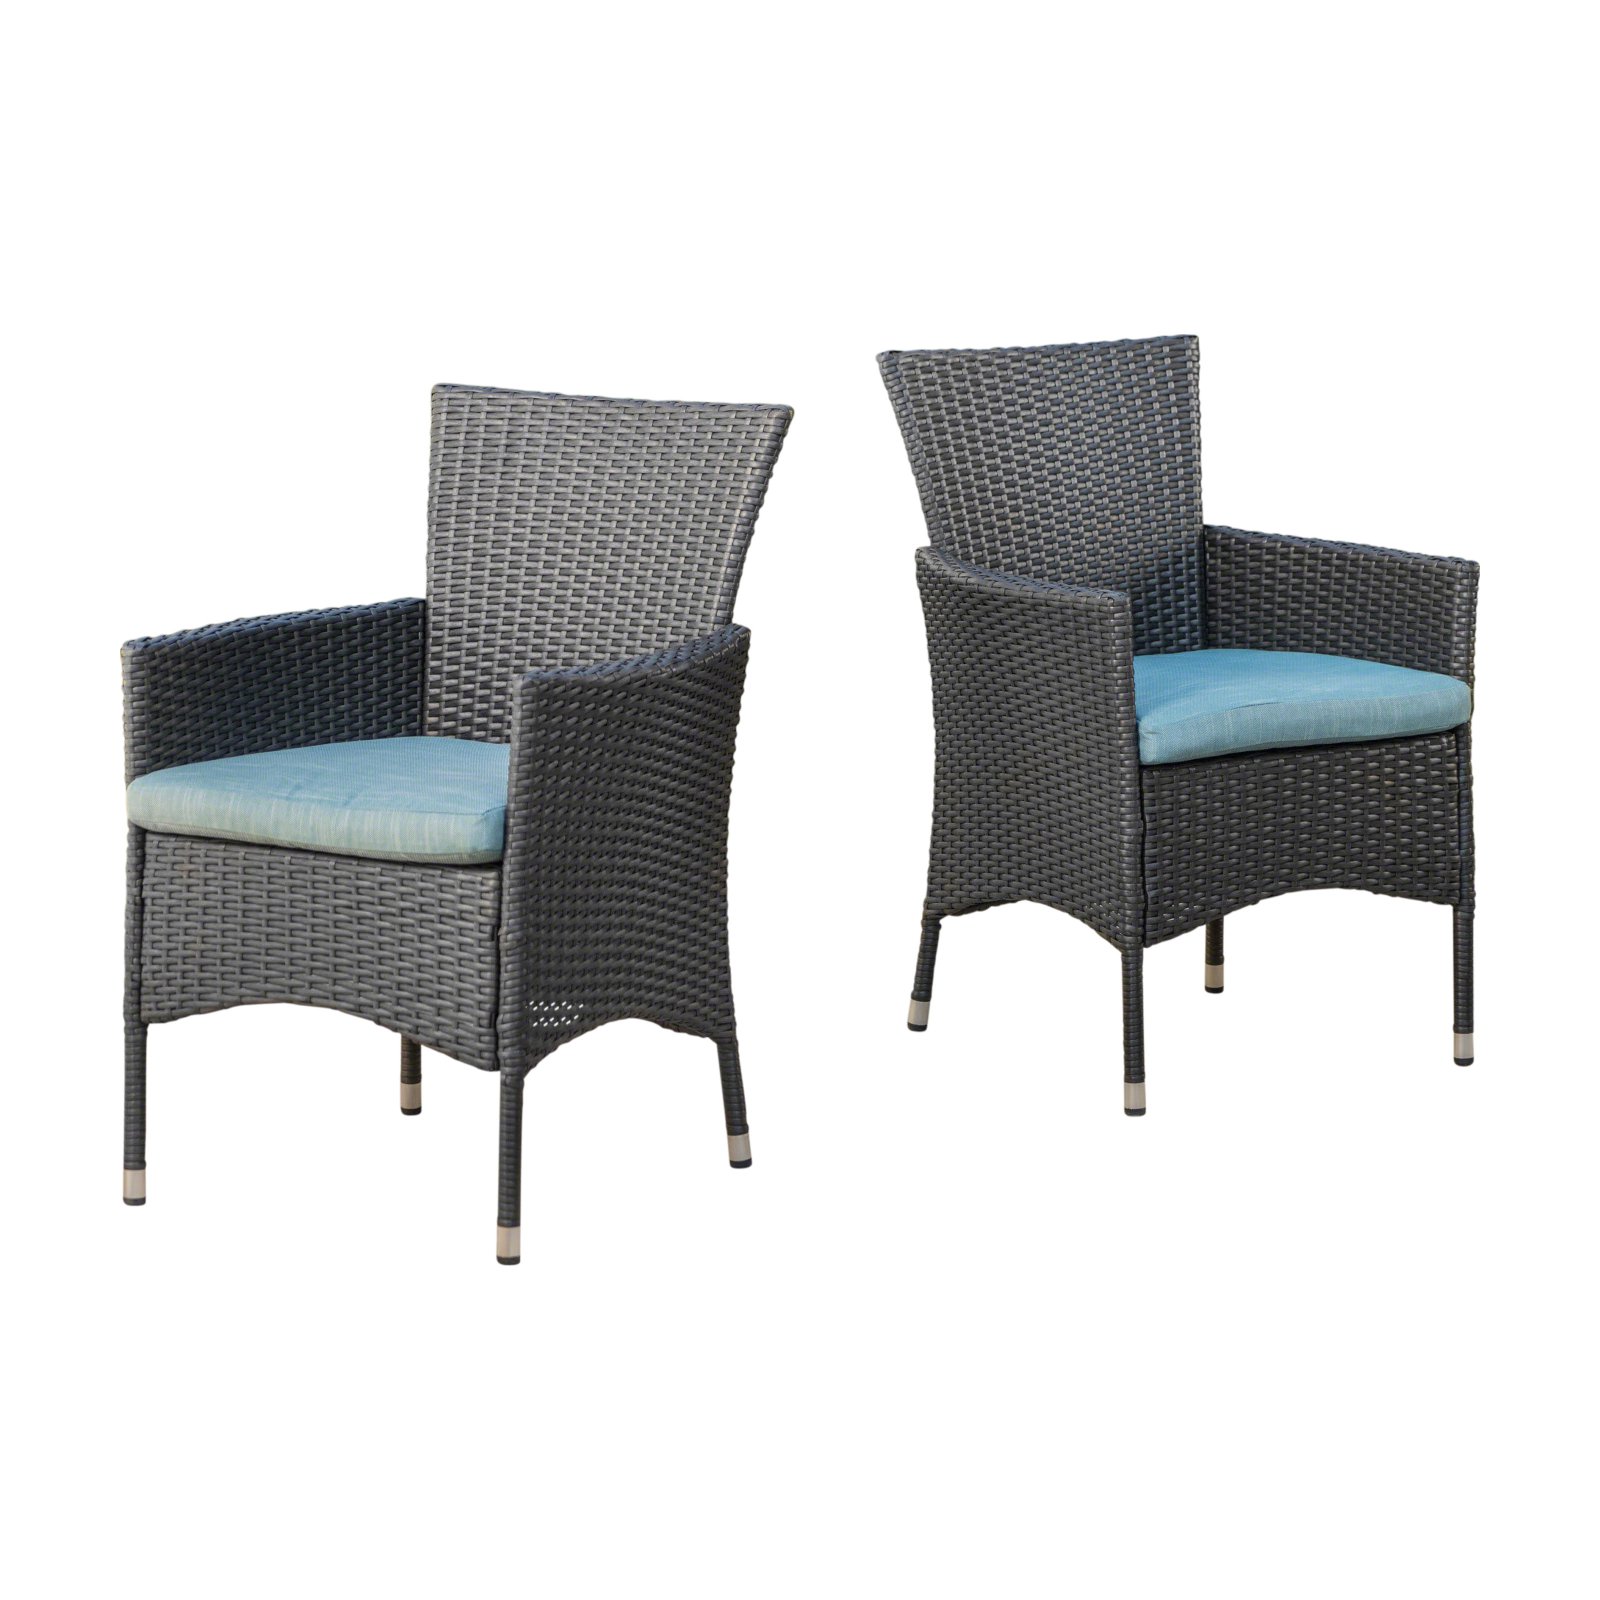 Curtis Outdoor Wicker Dining Chairs with Water Resistant Cushions - Set of 2 - image 2 of 11